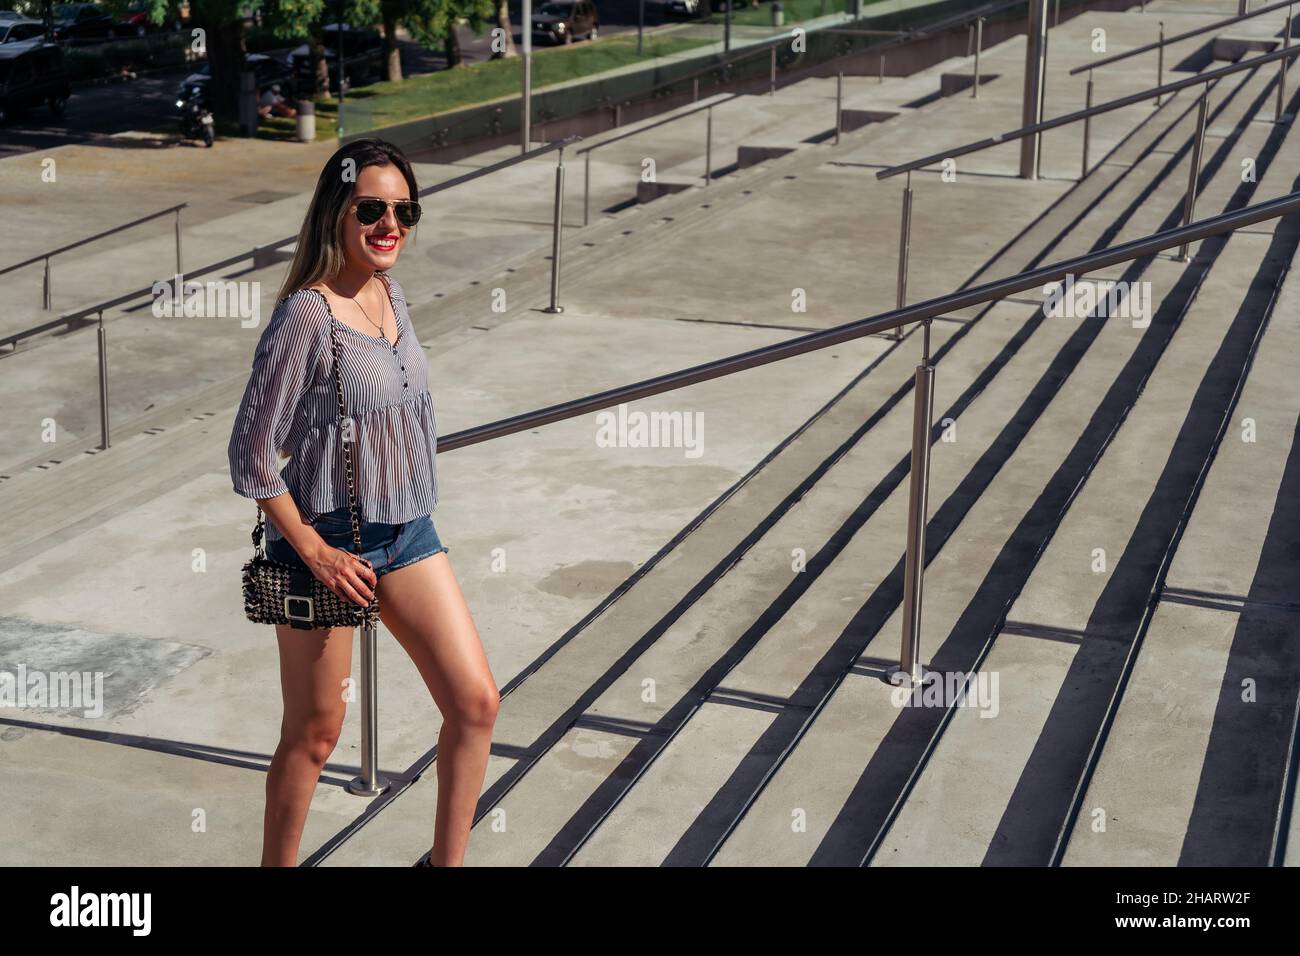 a Full-length shot of a beautiful Latina woman smiling and climbing a concrete staircase on a sunny day. Stock Photo